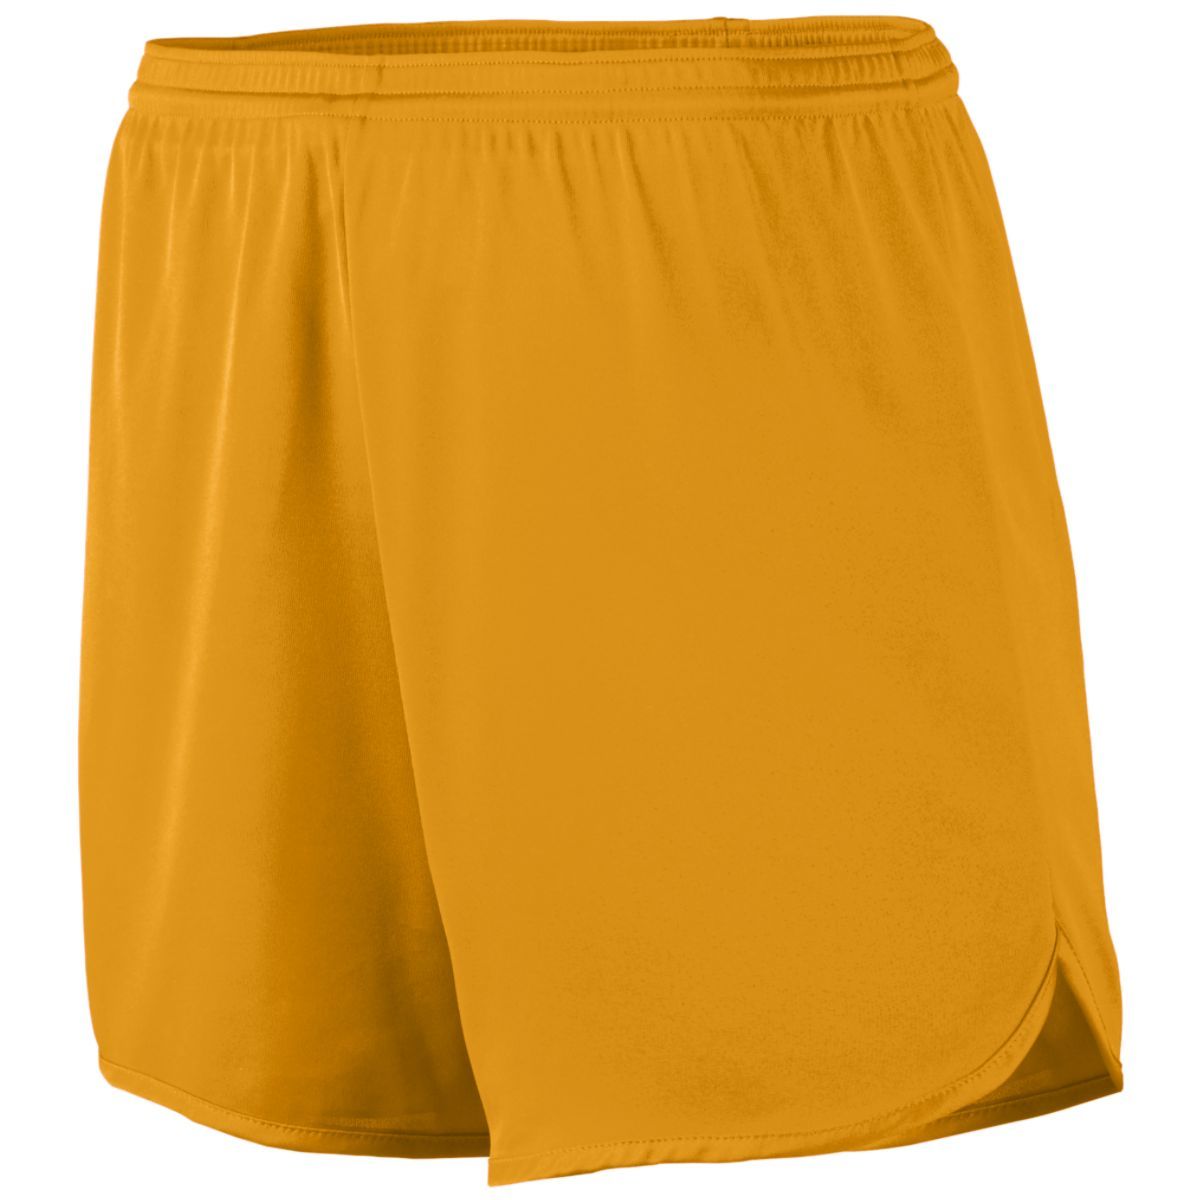 Augusta Sportswear Accelerate Shorts in Gold  -Part of the Adult, Adult-Shorts, Augusta-Products, Track-Field product lines at KanaleyCreations.com